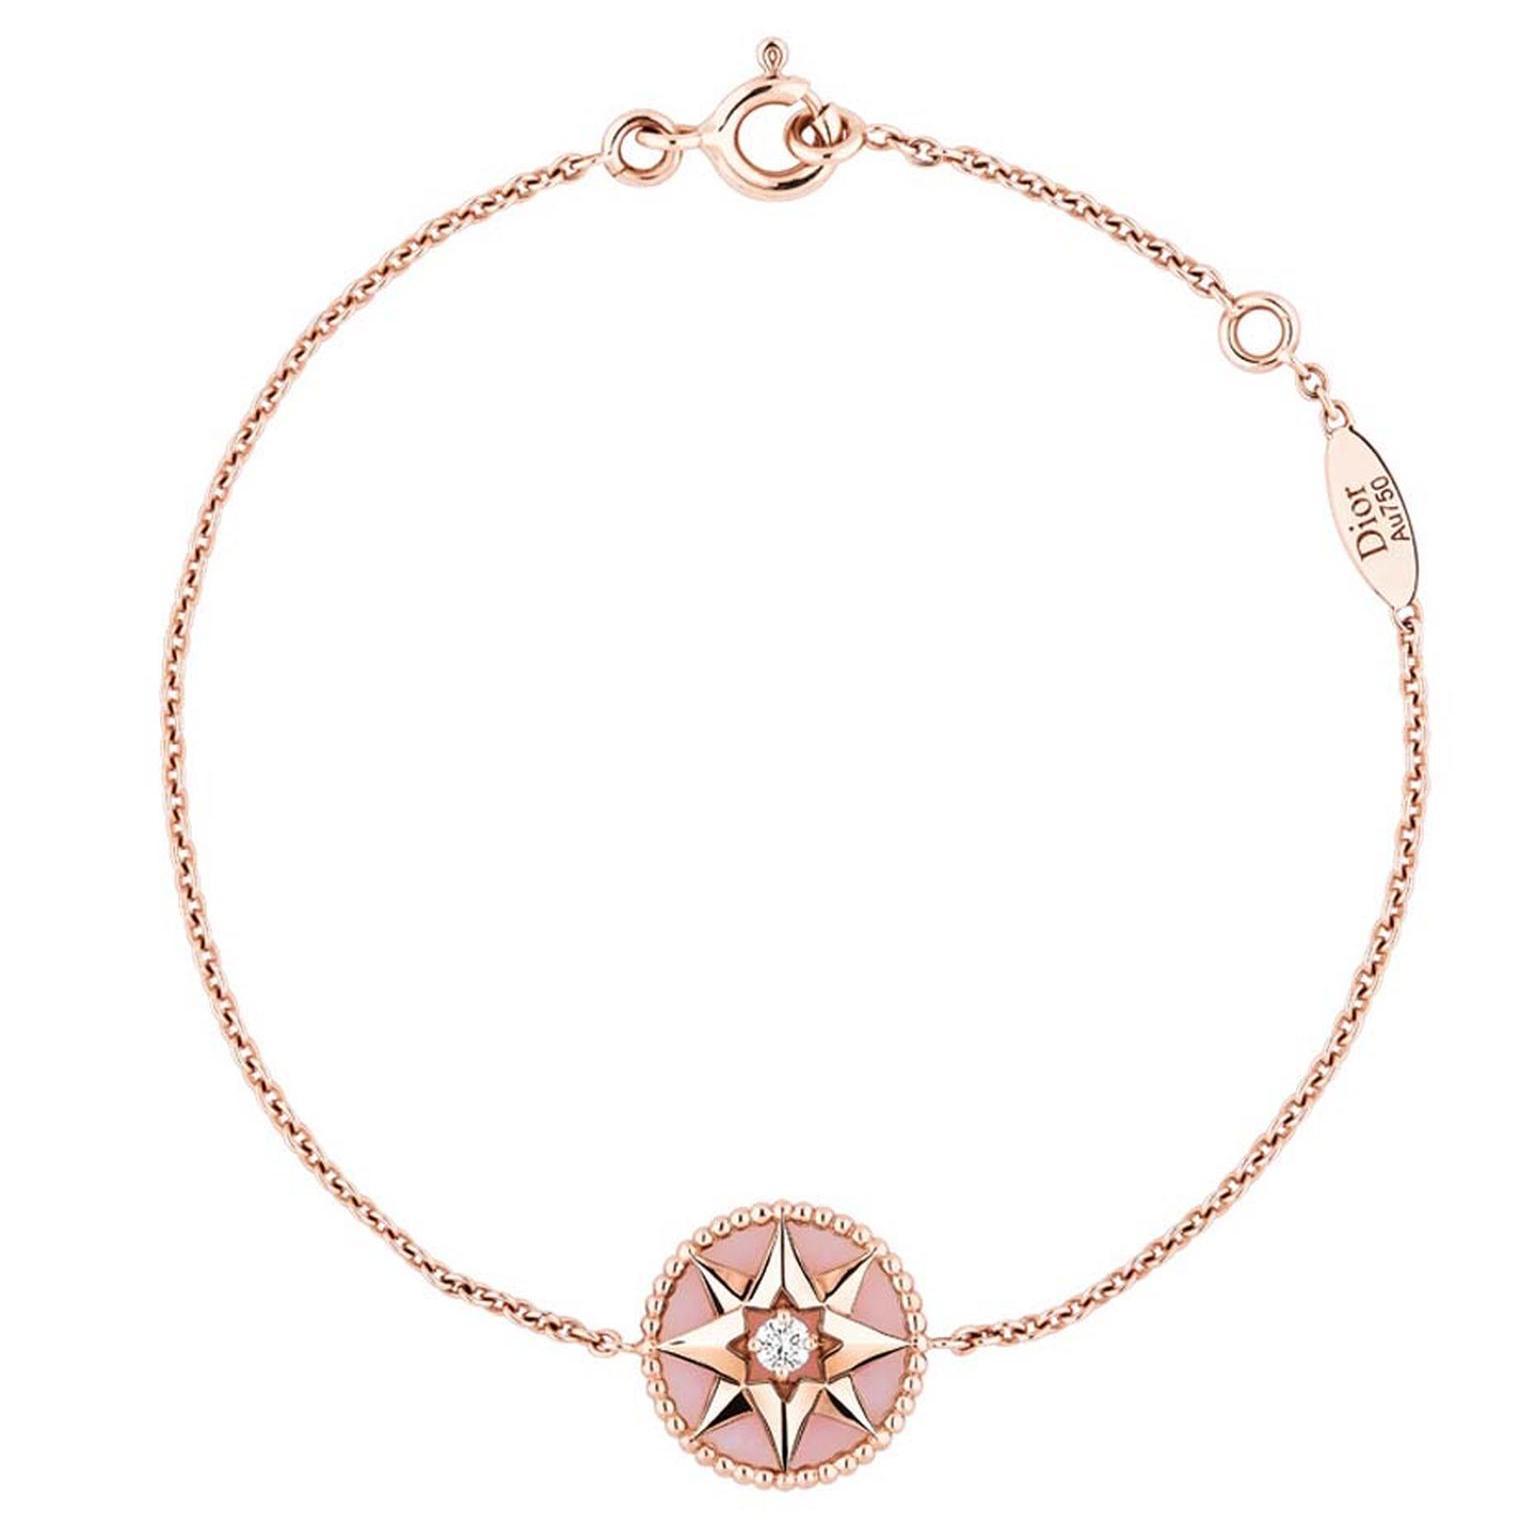 Rose Des Vents Pink Opal And Diamond Bracelet Dior The Jewellery Editor